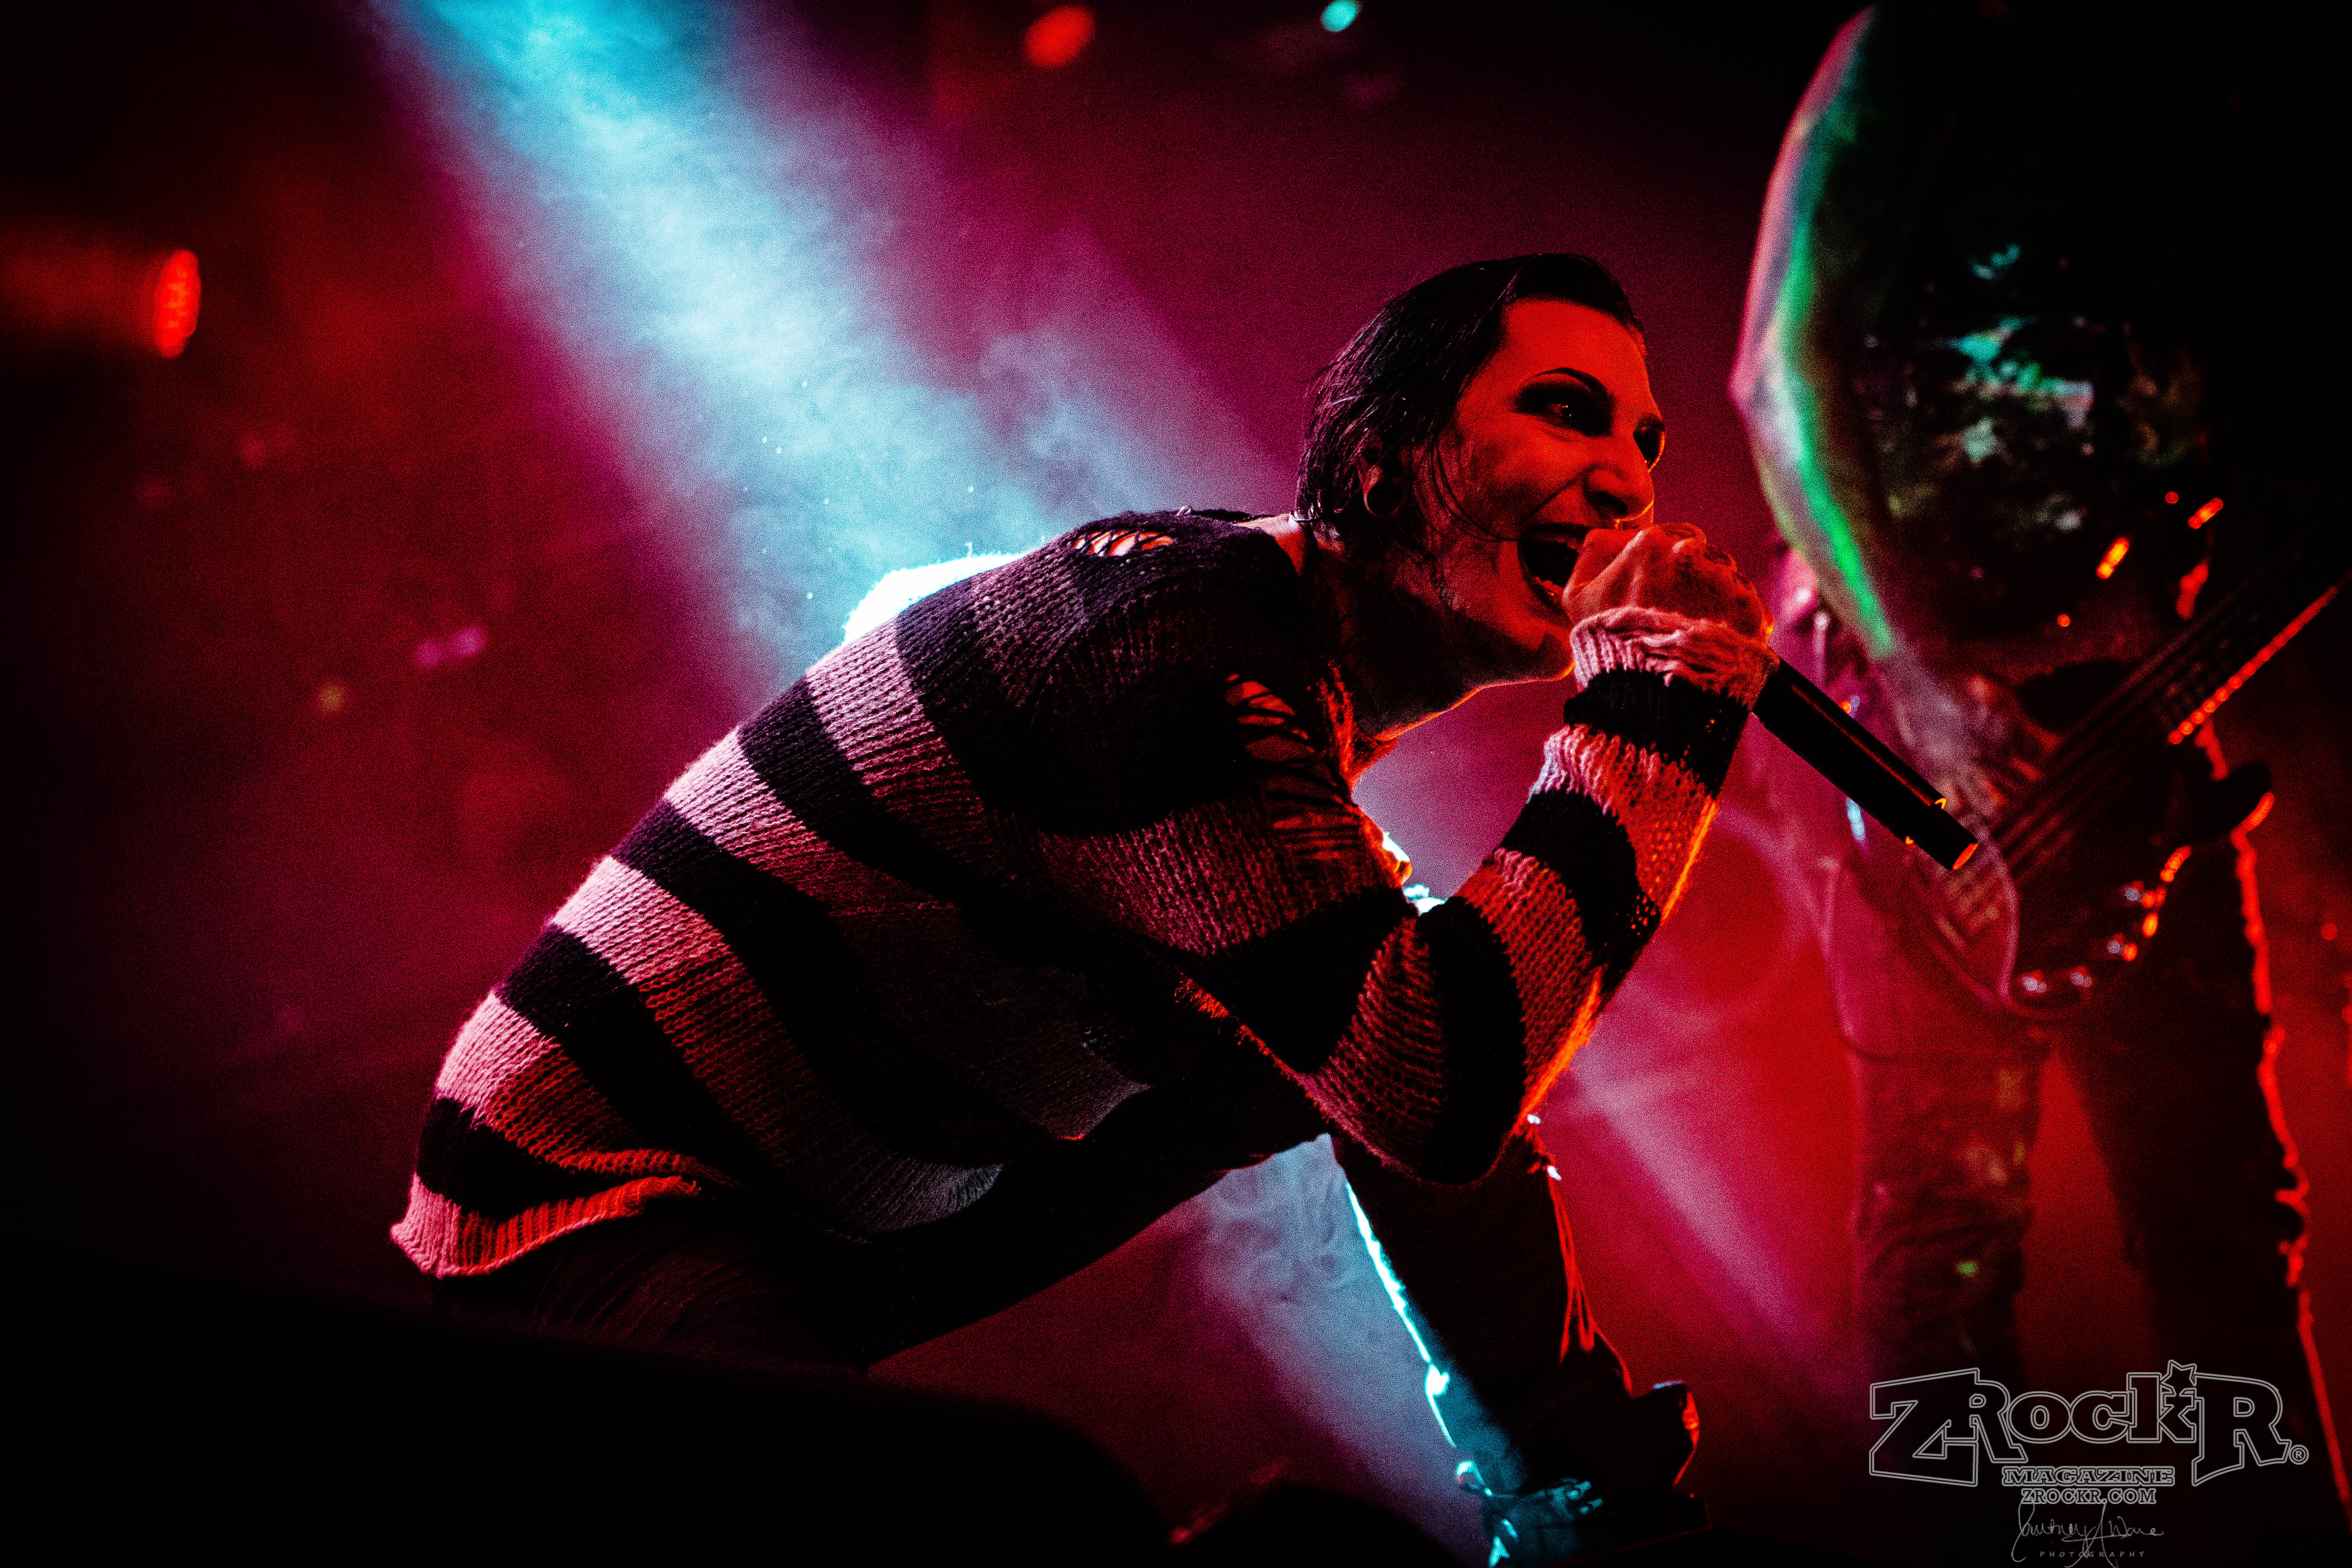 Motionless in White – Trick Or Treat Tour Hits HOB!